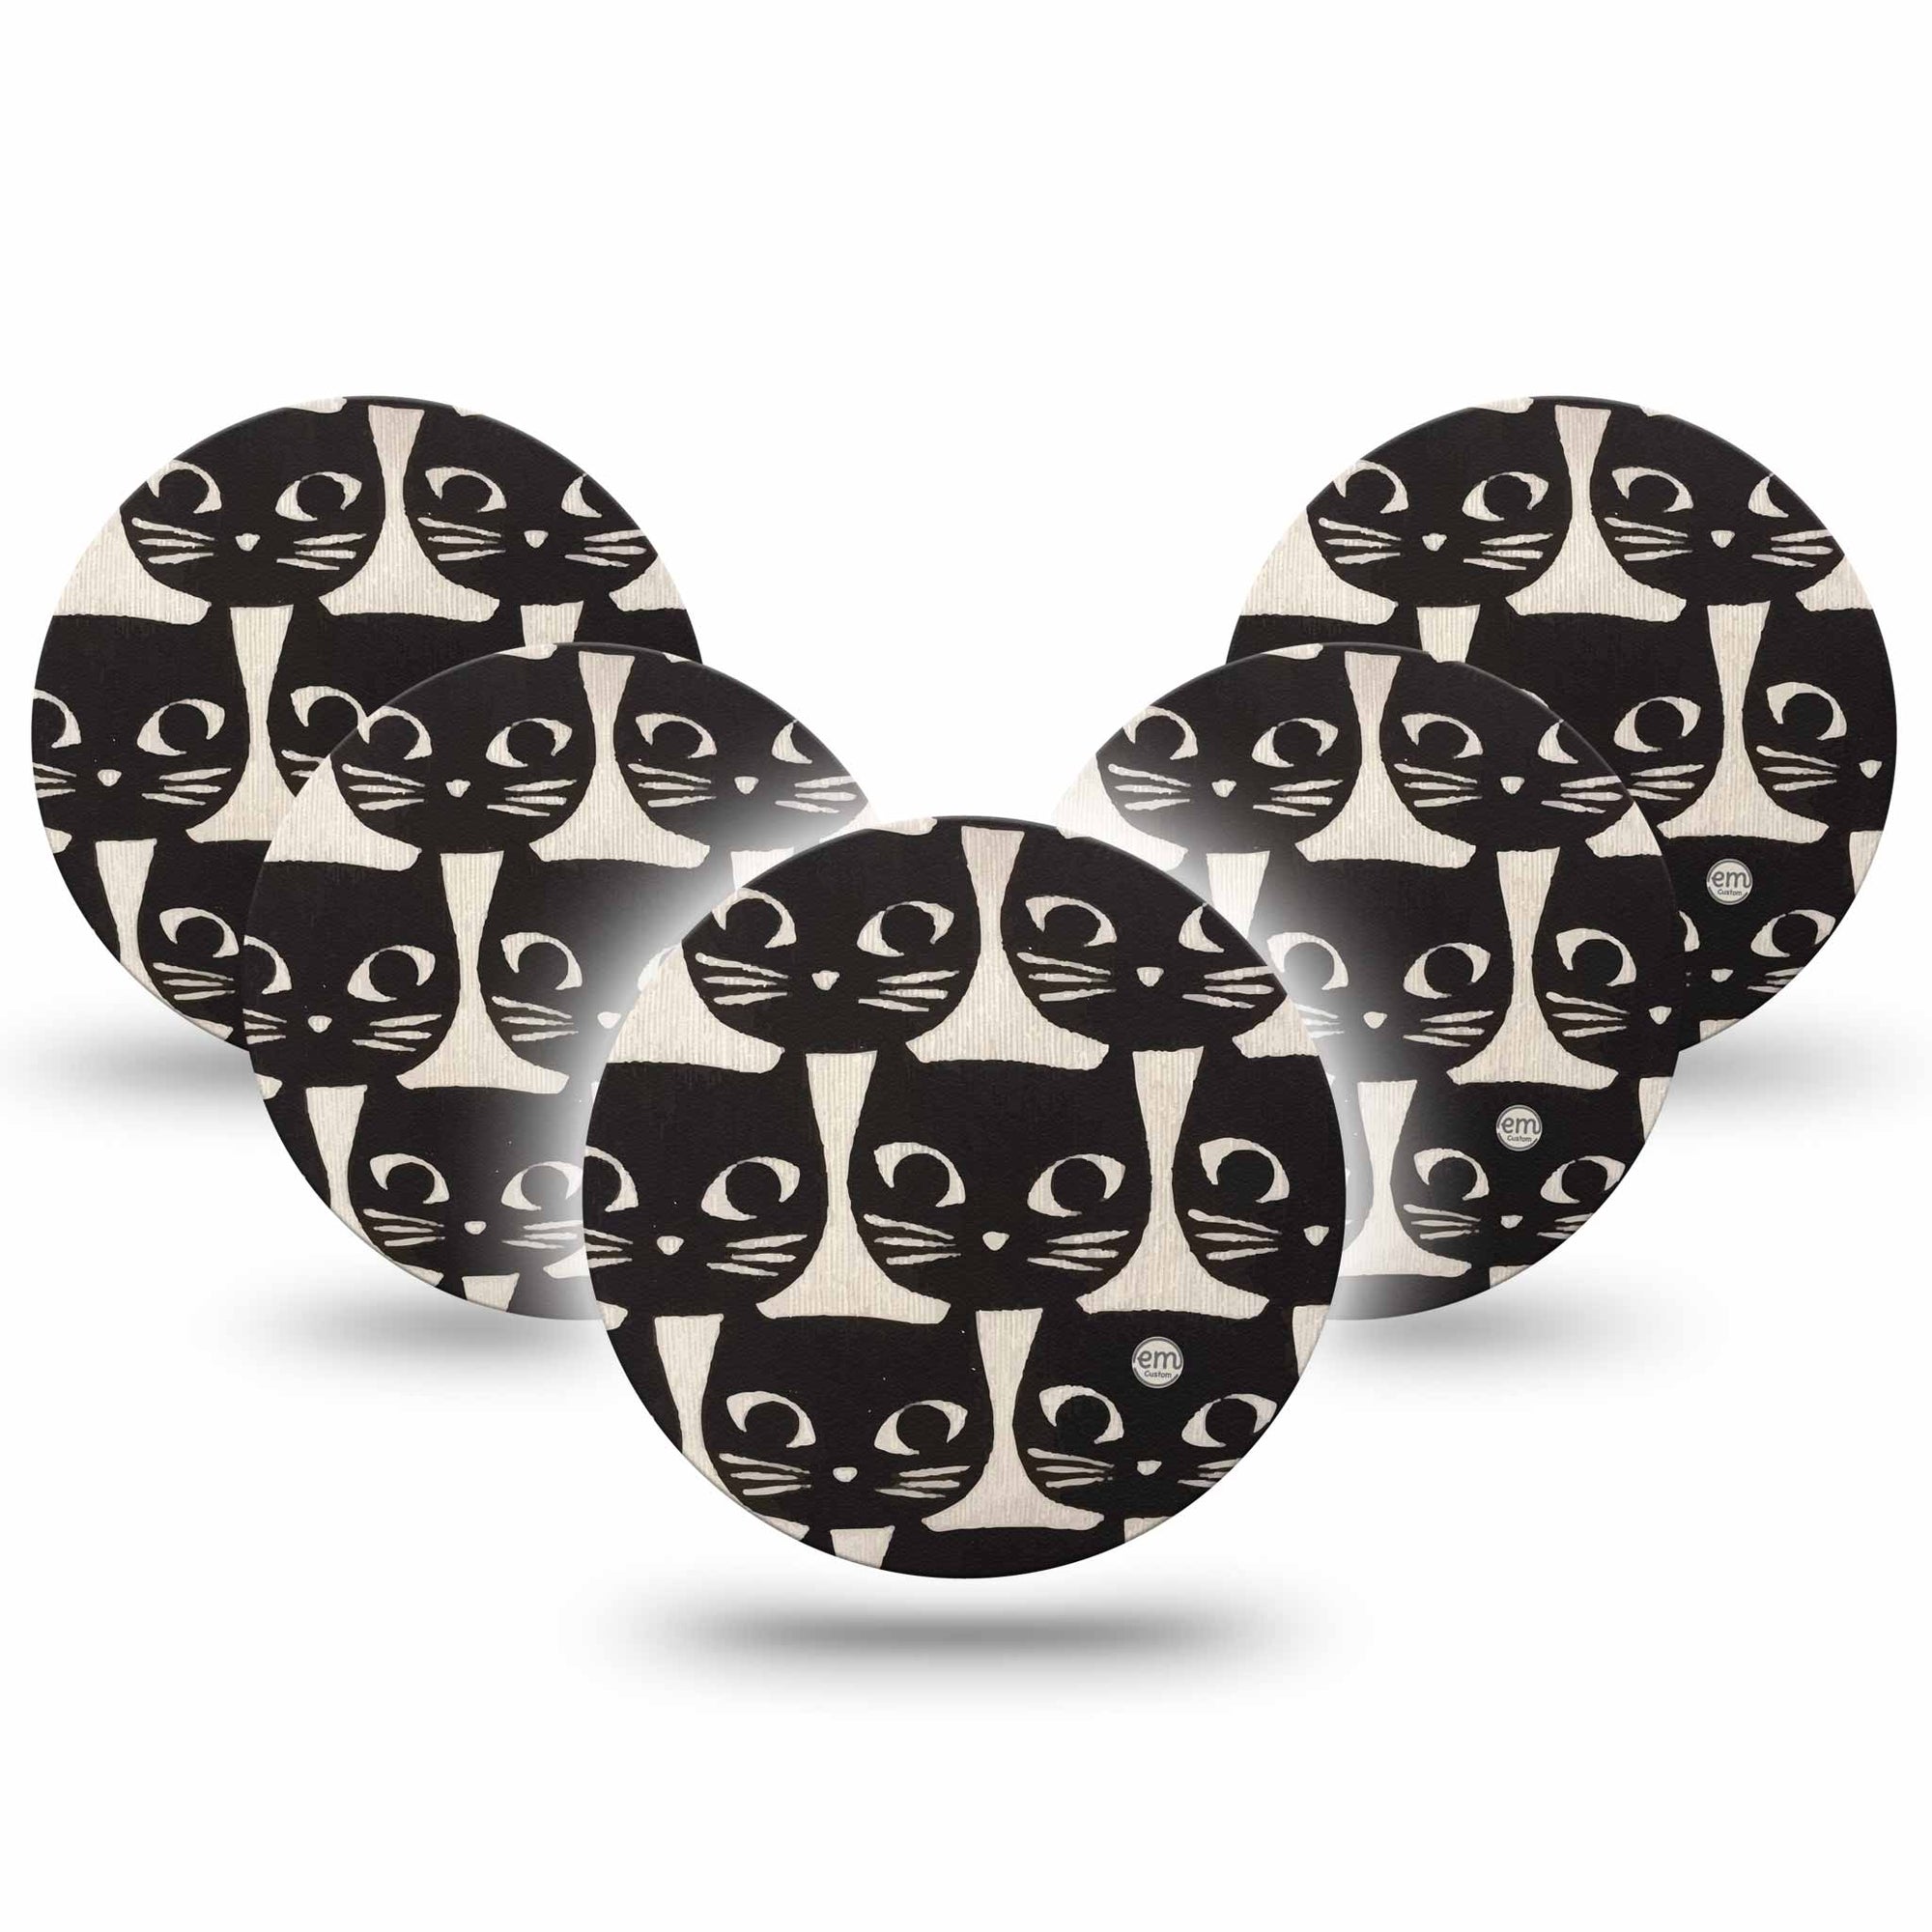 ExpressionMed Black Cats 5-Pack Libre 2 overpatch repeating kitten CGM Plaster Overlay Design 